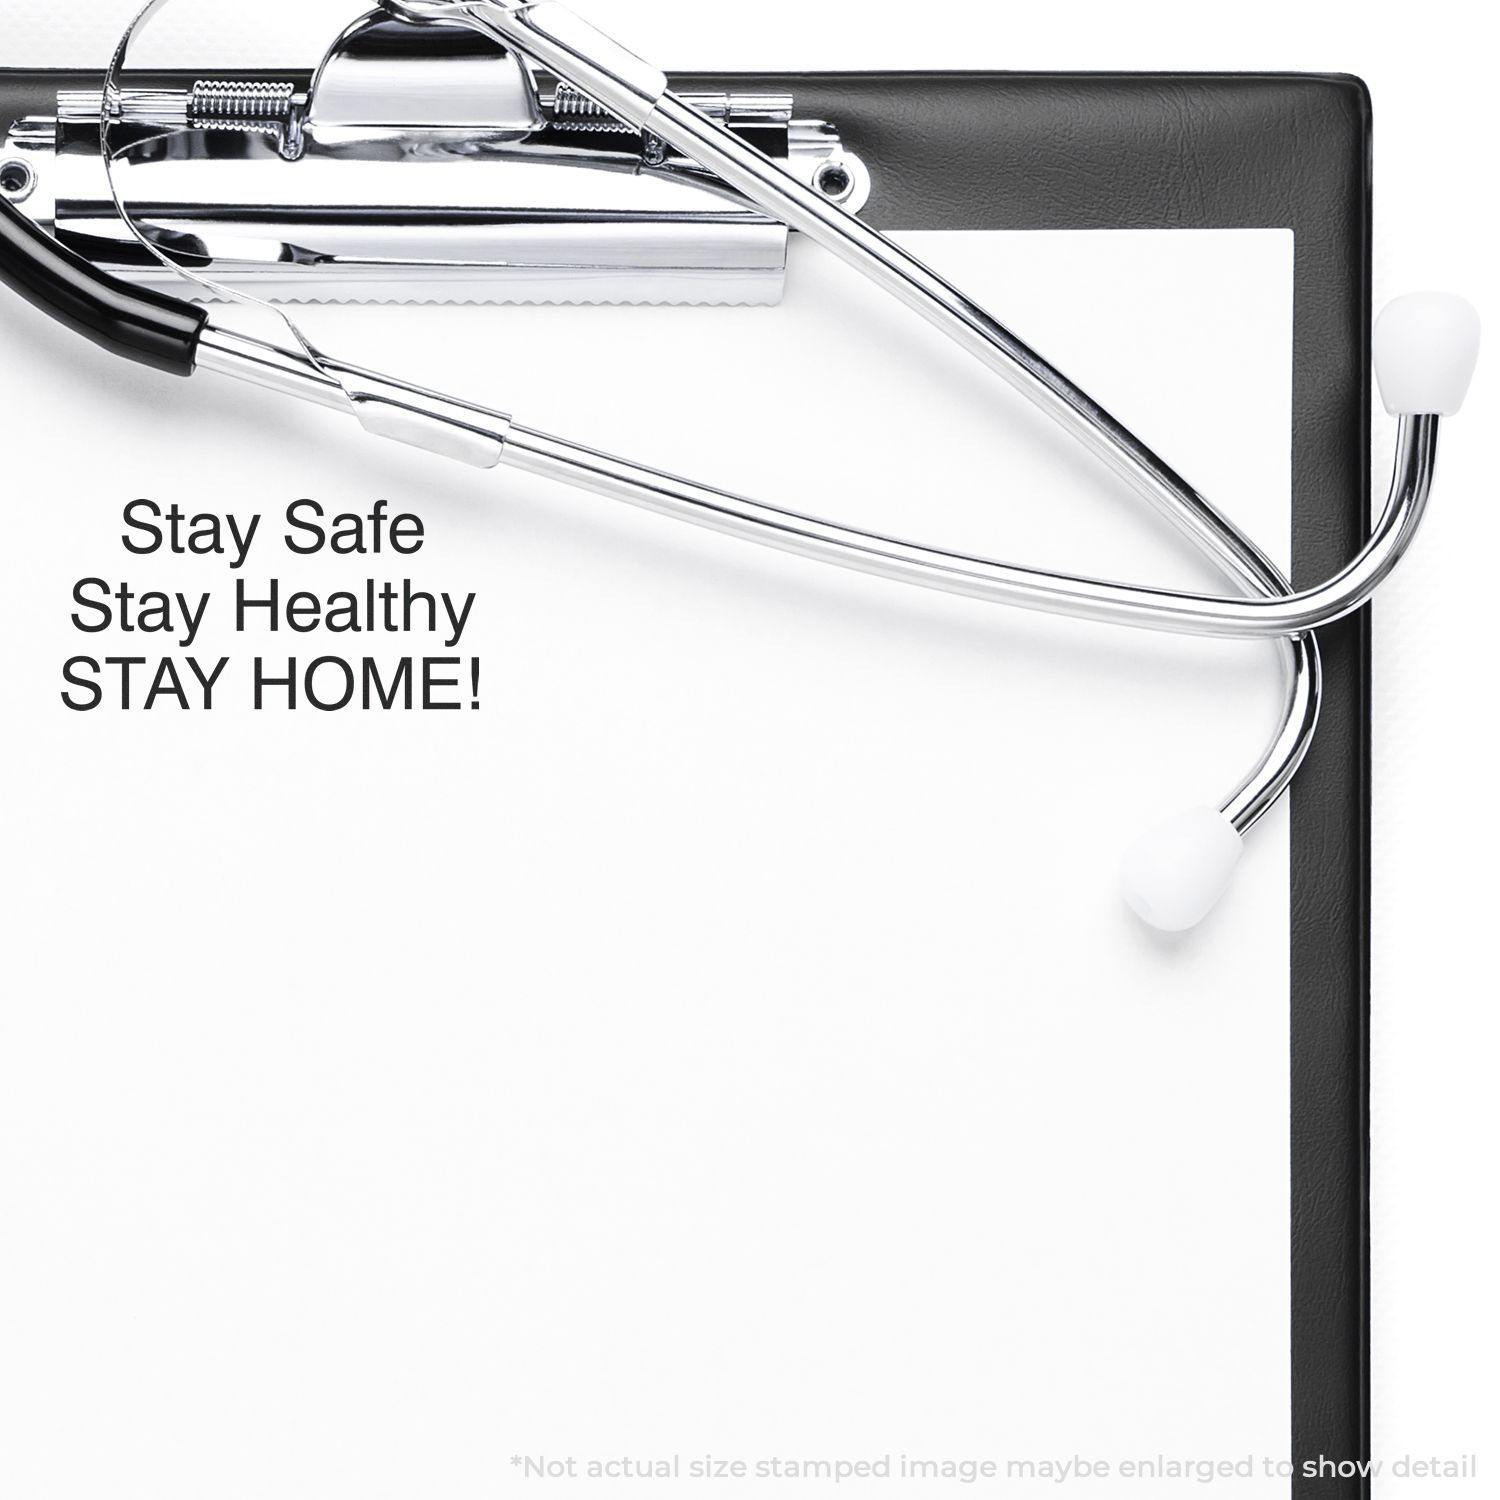 A self-inking stamp with a stamped image showing how the text "Stay Safe Stay Healthy STAY HOME!" in a large font is displayed by it after stamping.